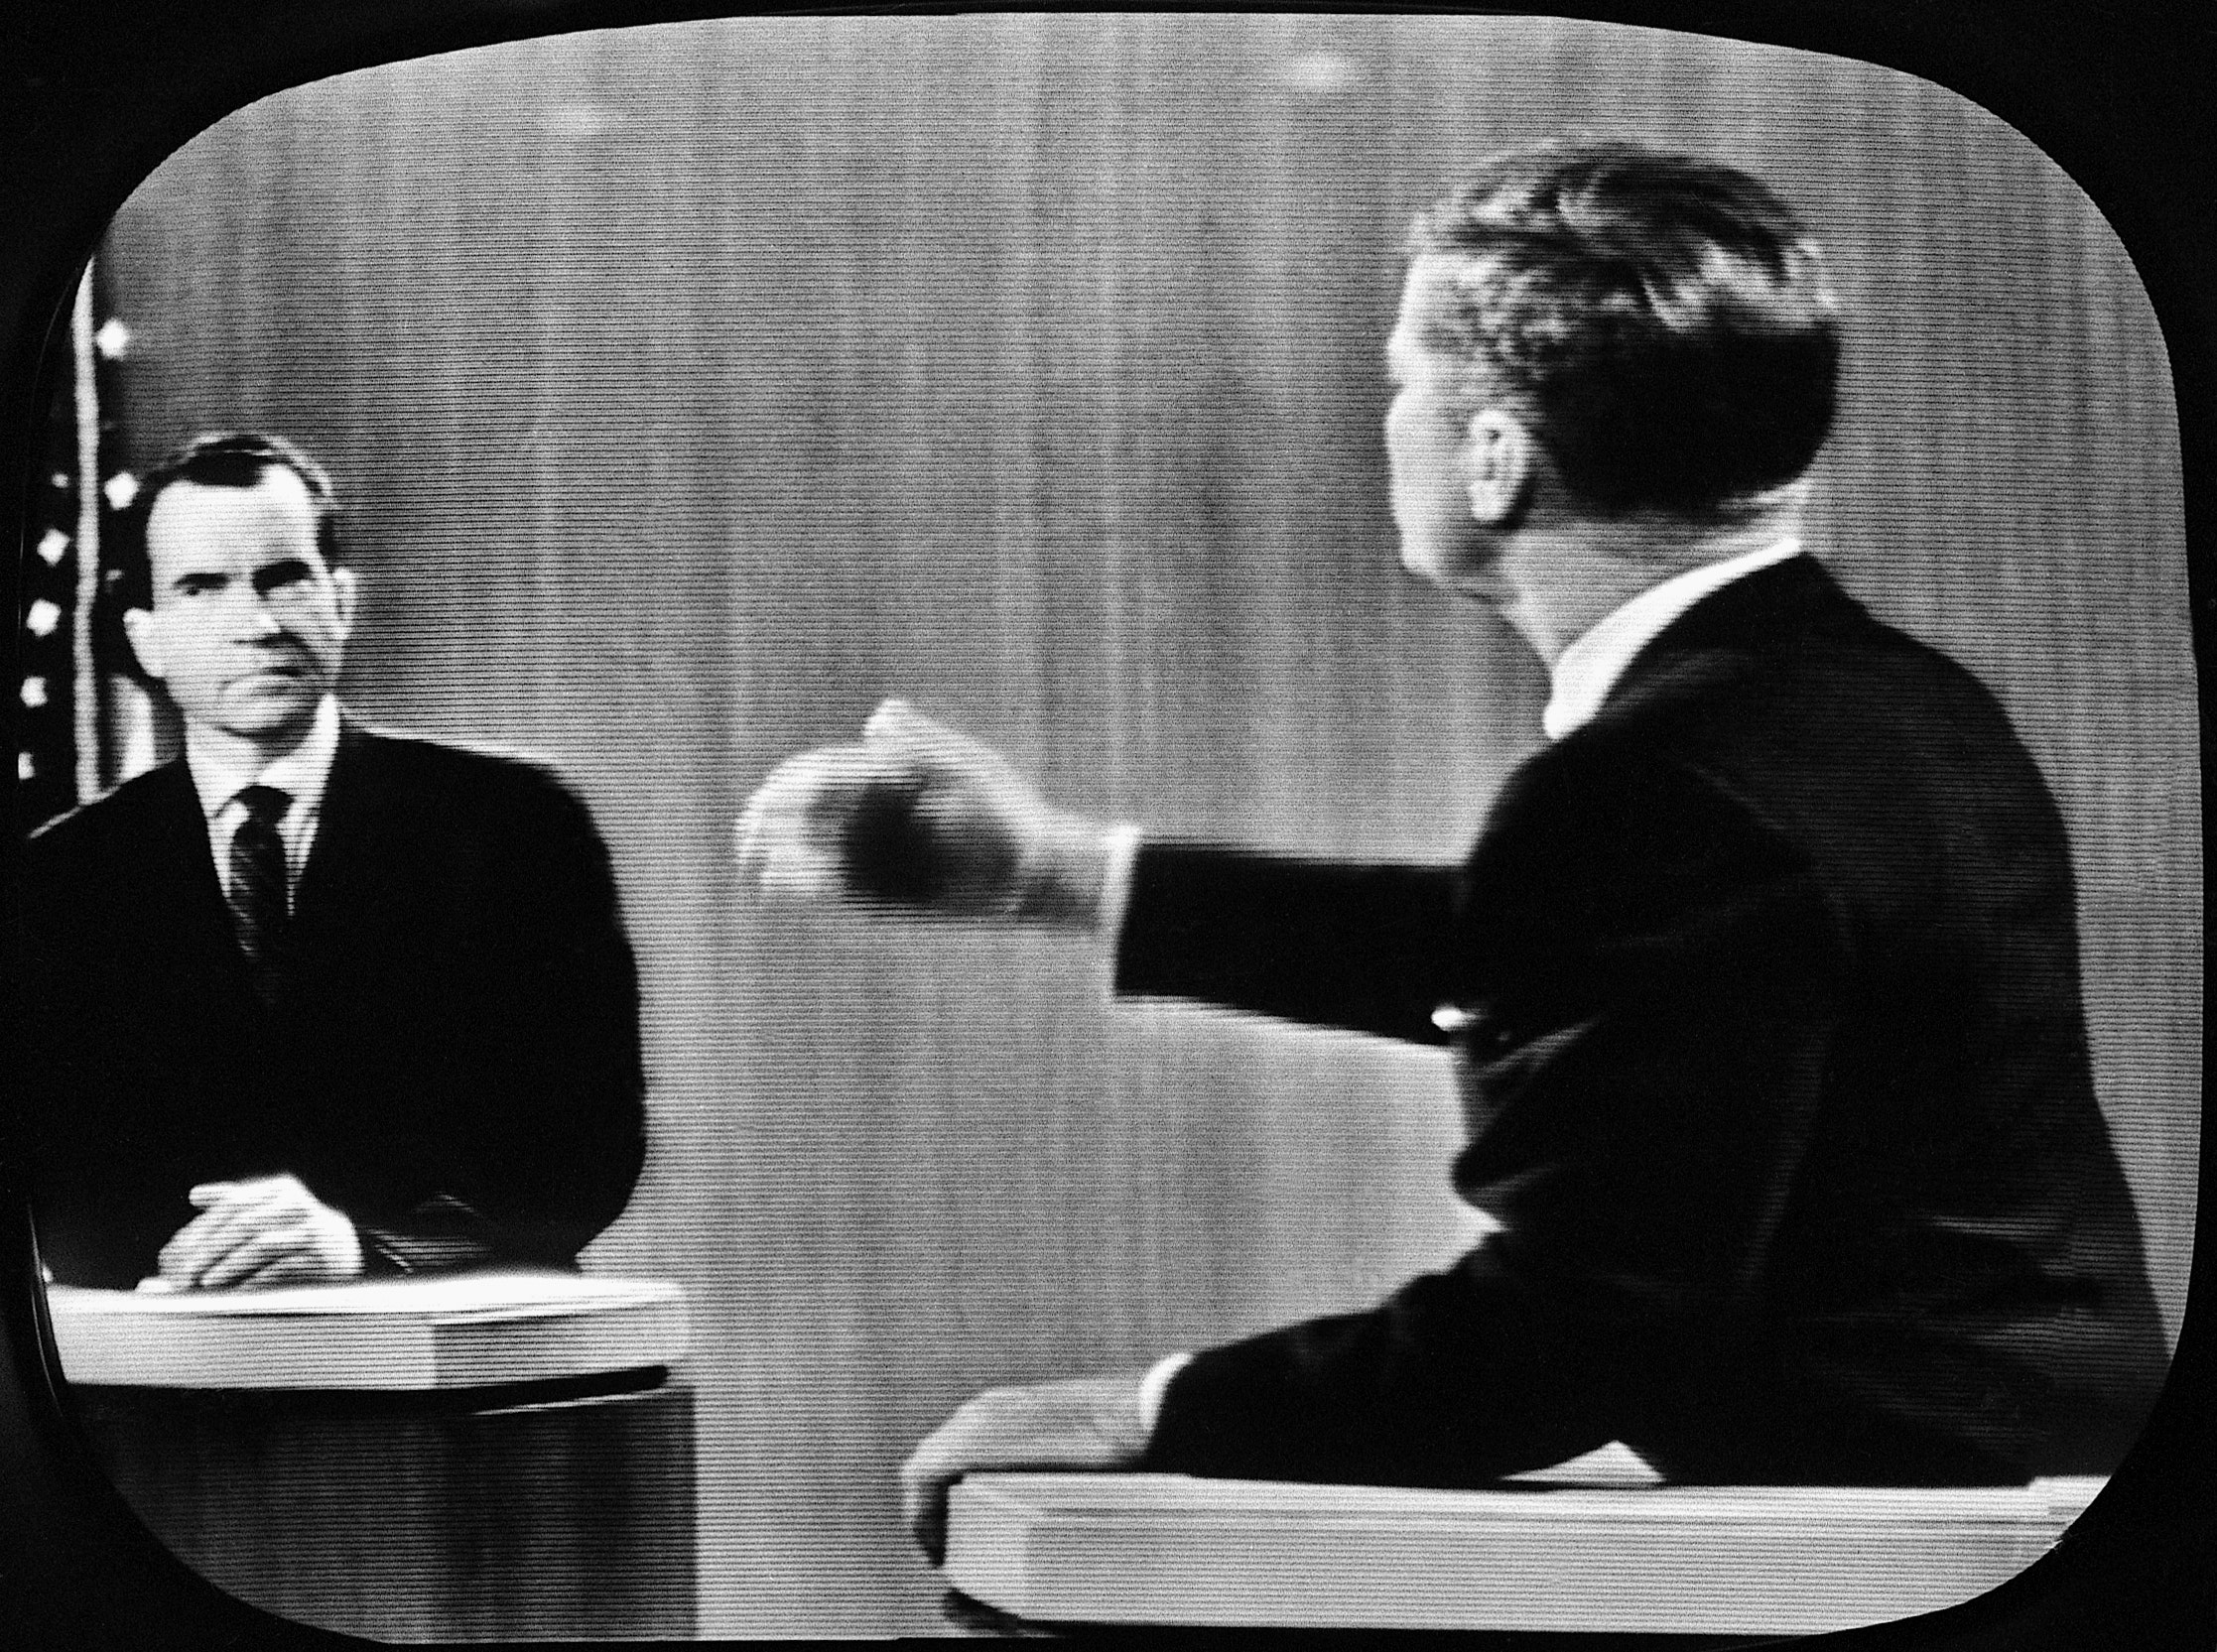 On this day in history, Sept. 26, 1960, Kennedy and Nixon battle in first televised presidential debate